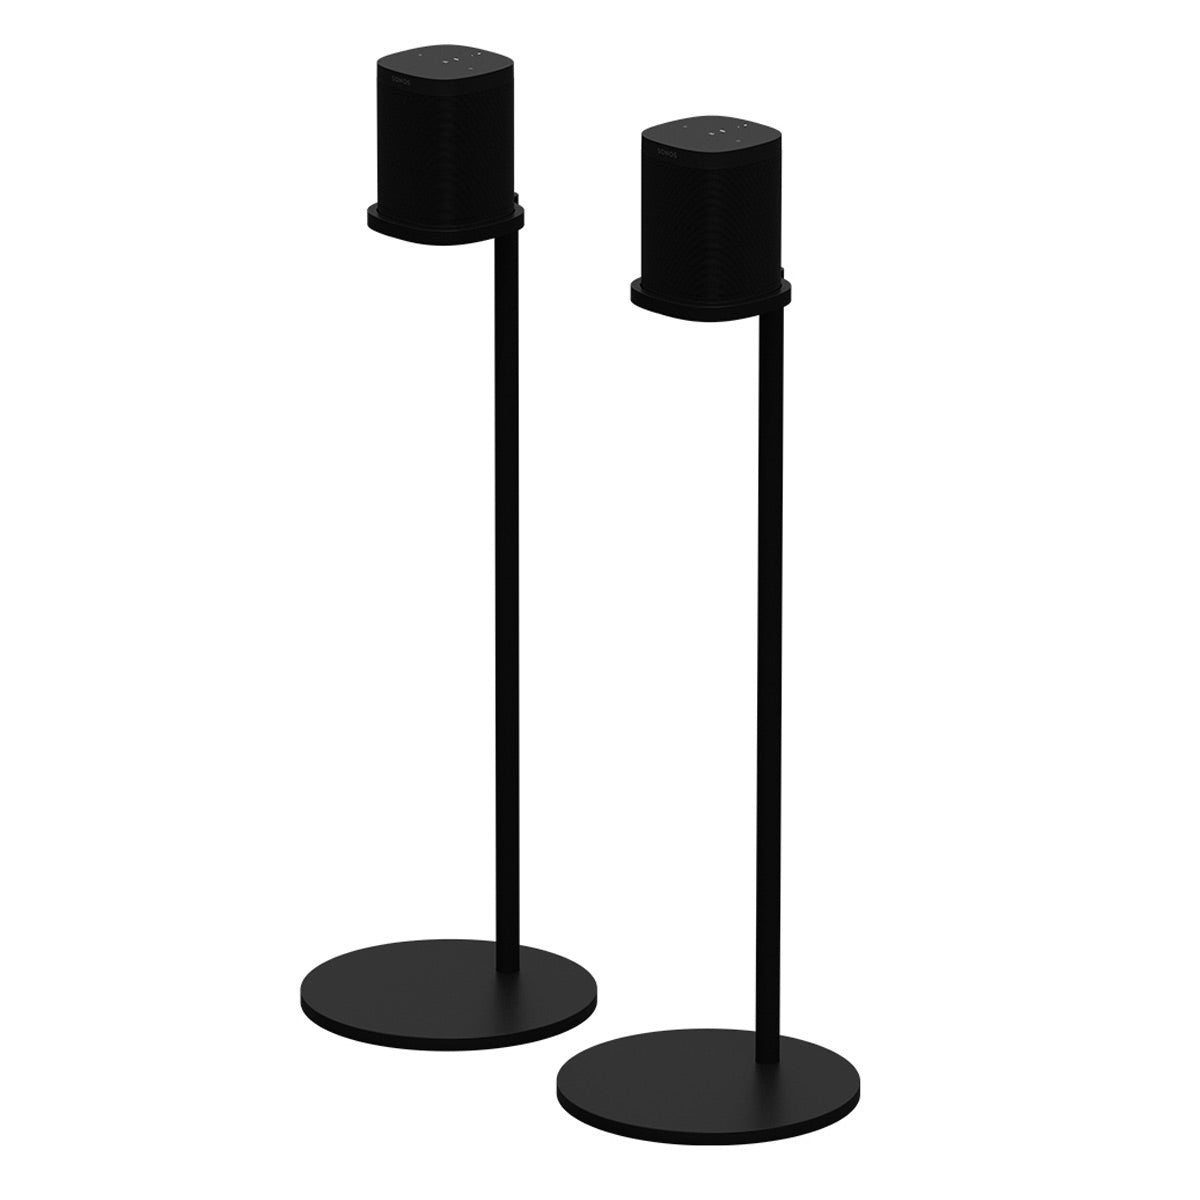 Sonos Floorstands for Sonos One and PLAY:1 - Pair (Black)